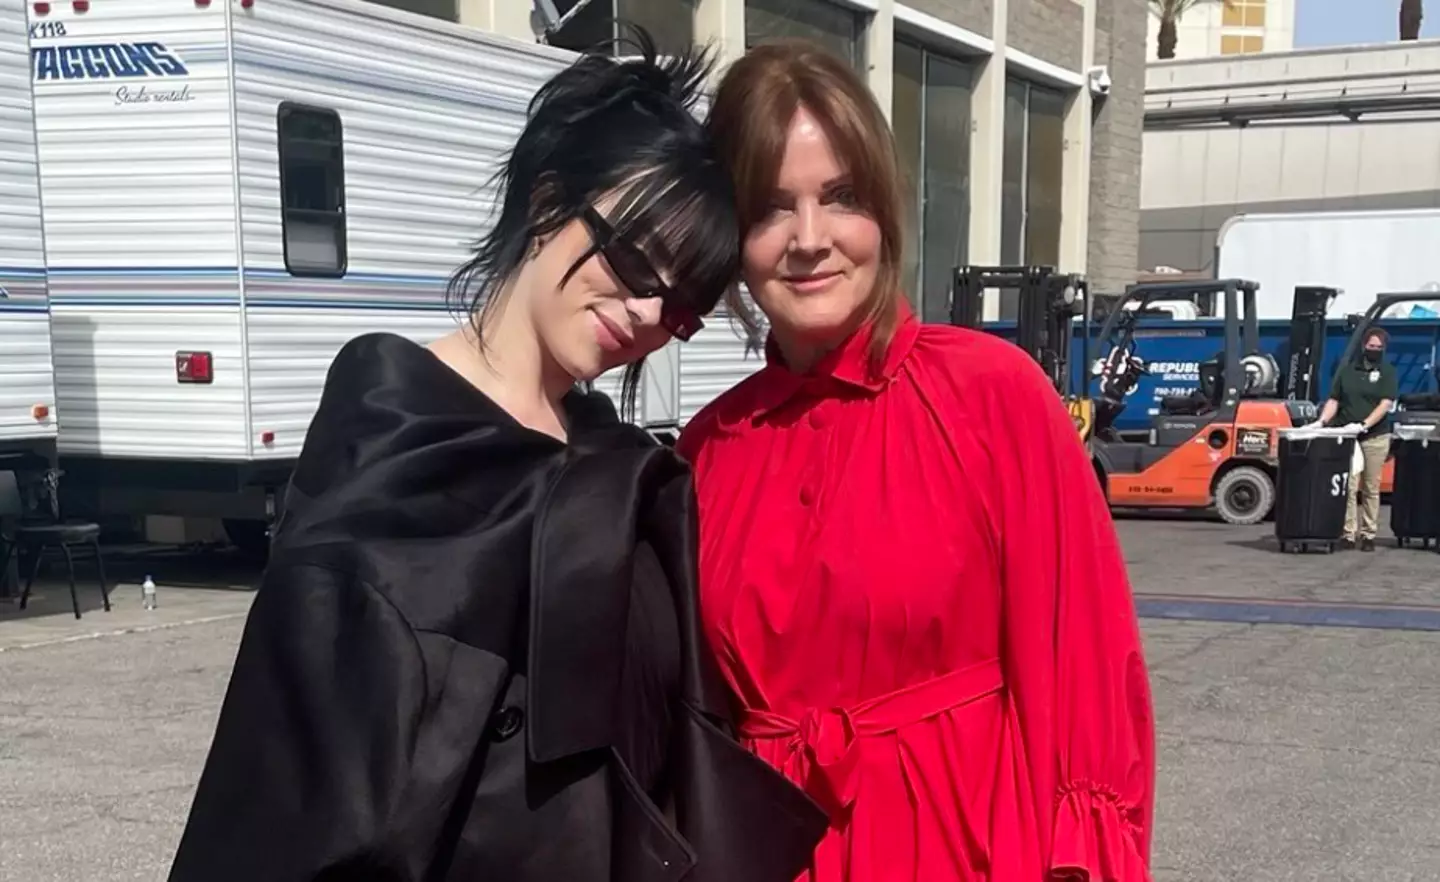 Billie Eilish's mother Maggie Baird has opened up about her daughter's Glastonbury performance.